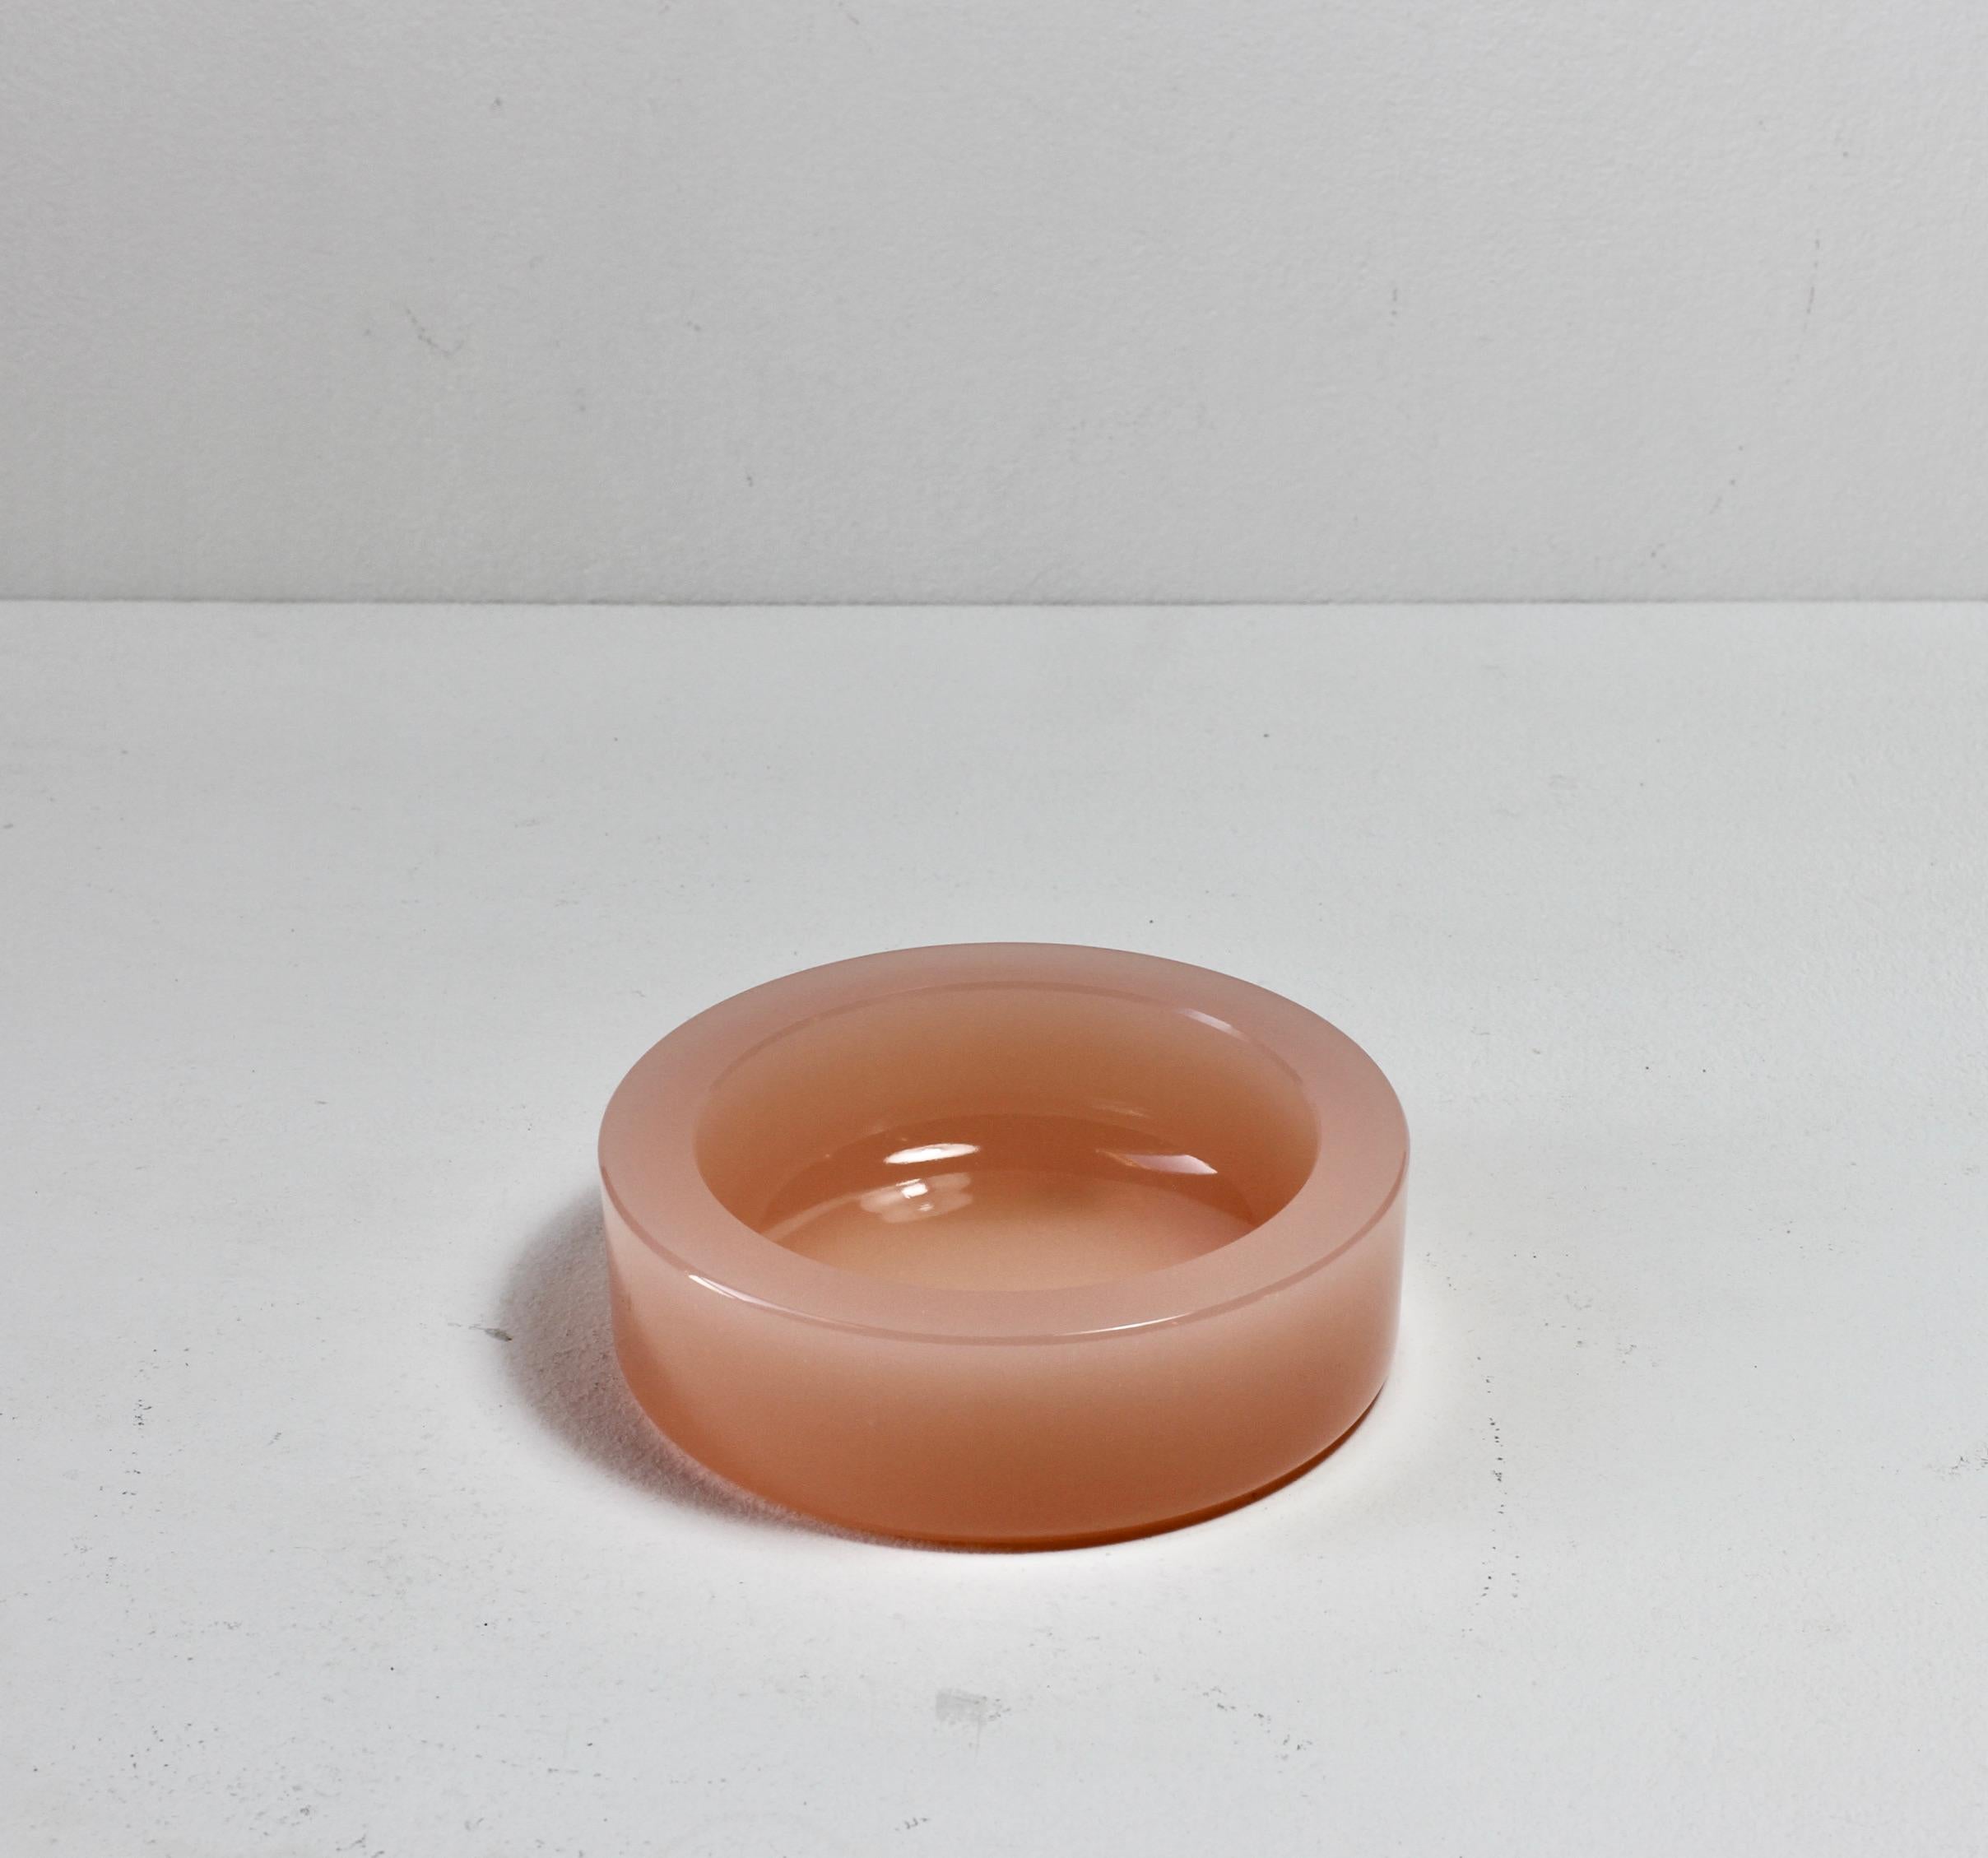 Blown Glass Cenedese Vintage Pink Opaline Murano Glass Dishes, Bowls or Ashtrays 1970s For Sale